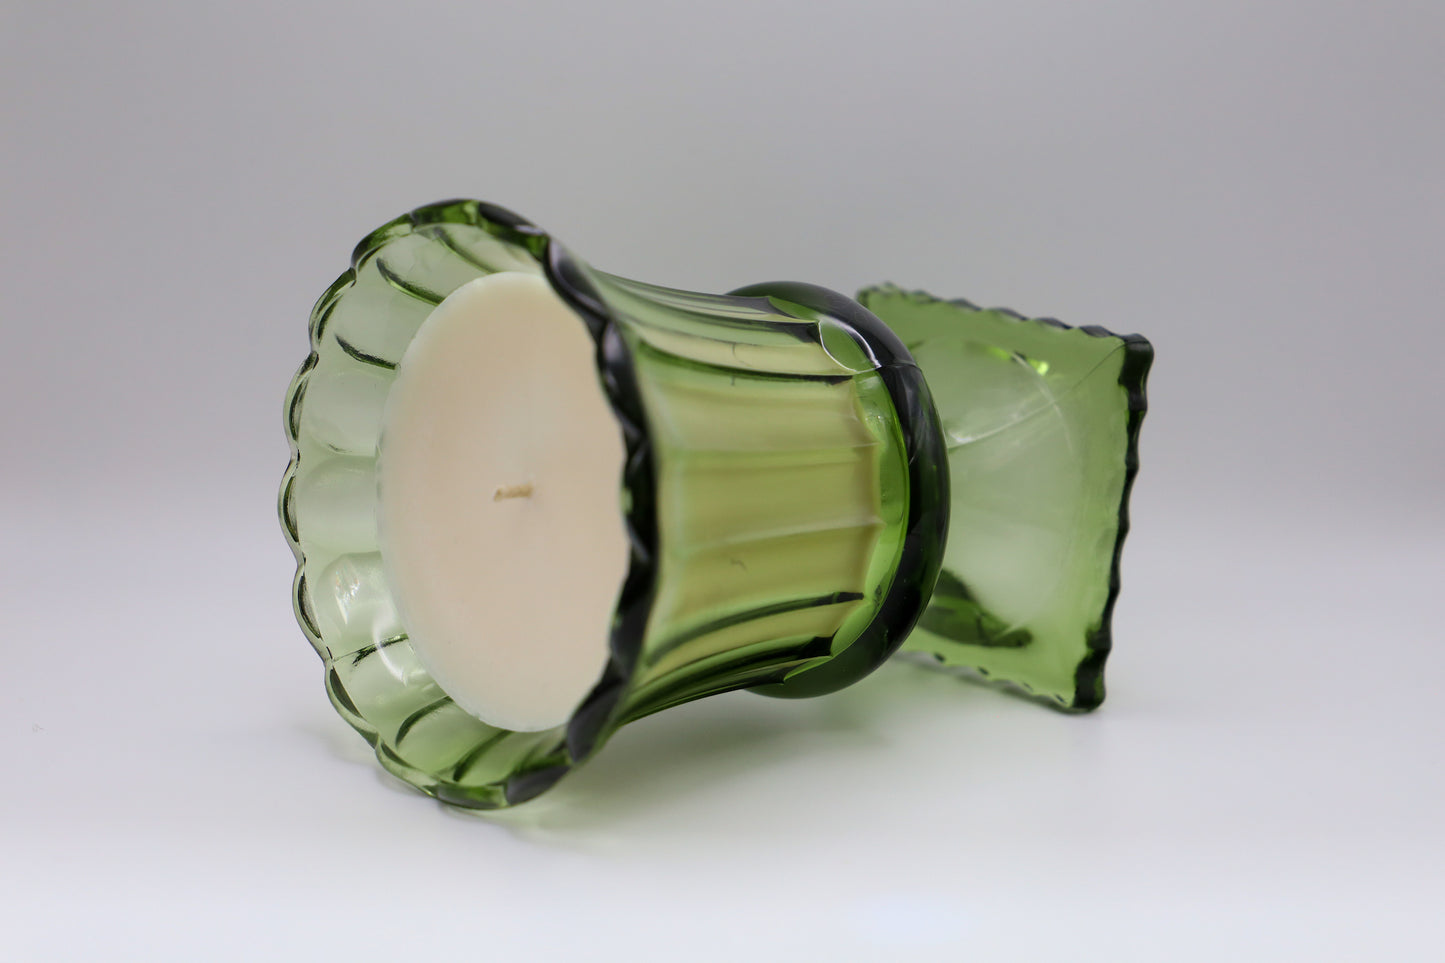 Green Footed Vase